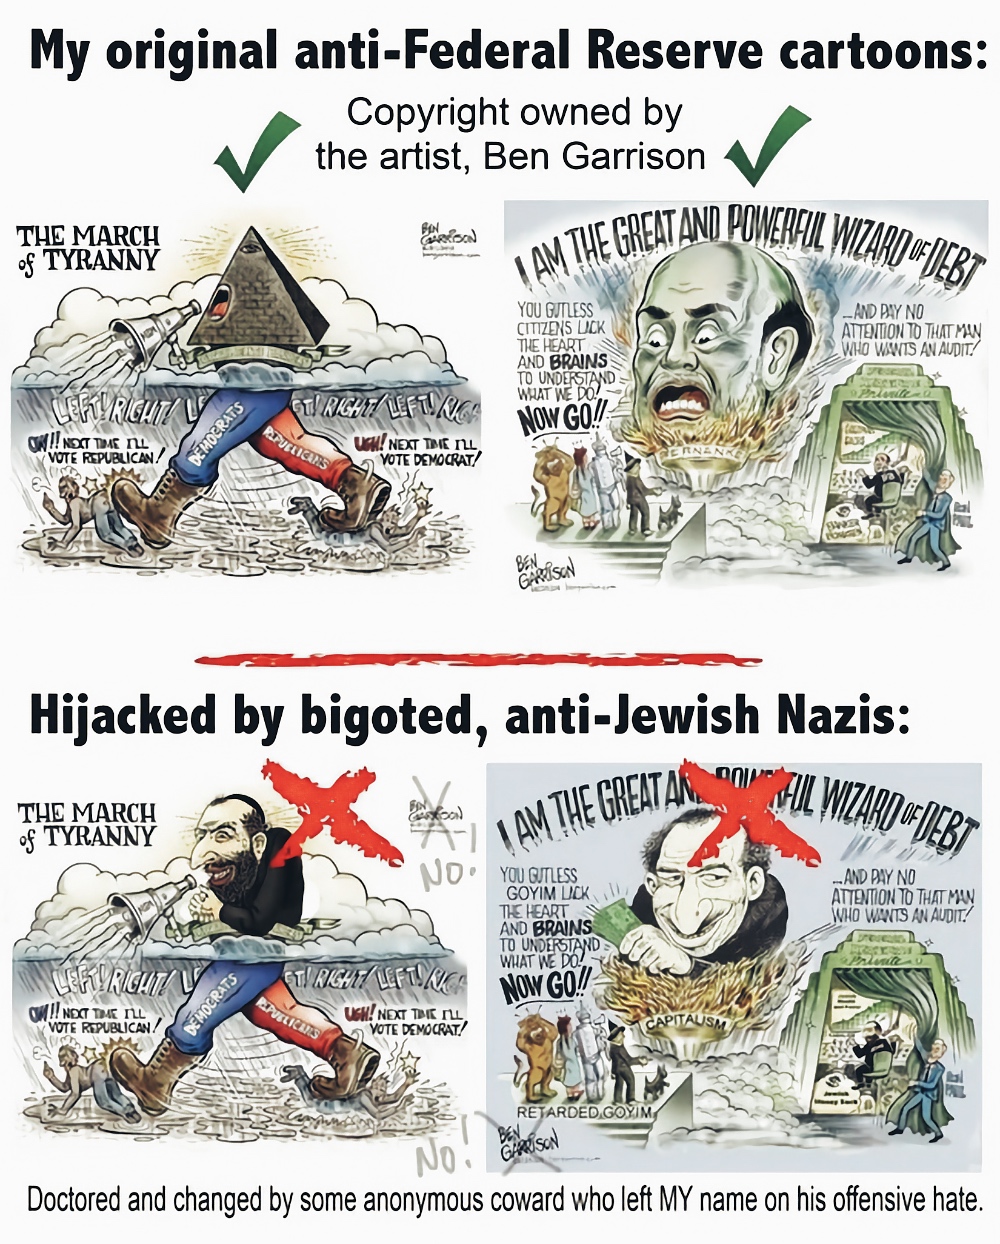 Garrison posted an image showing how his cartoons have been manipulated